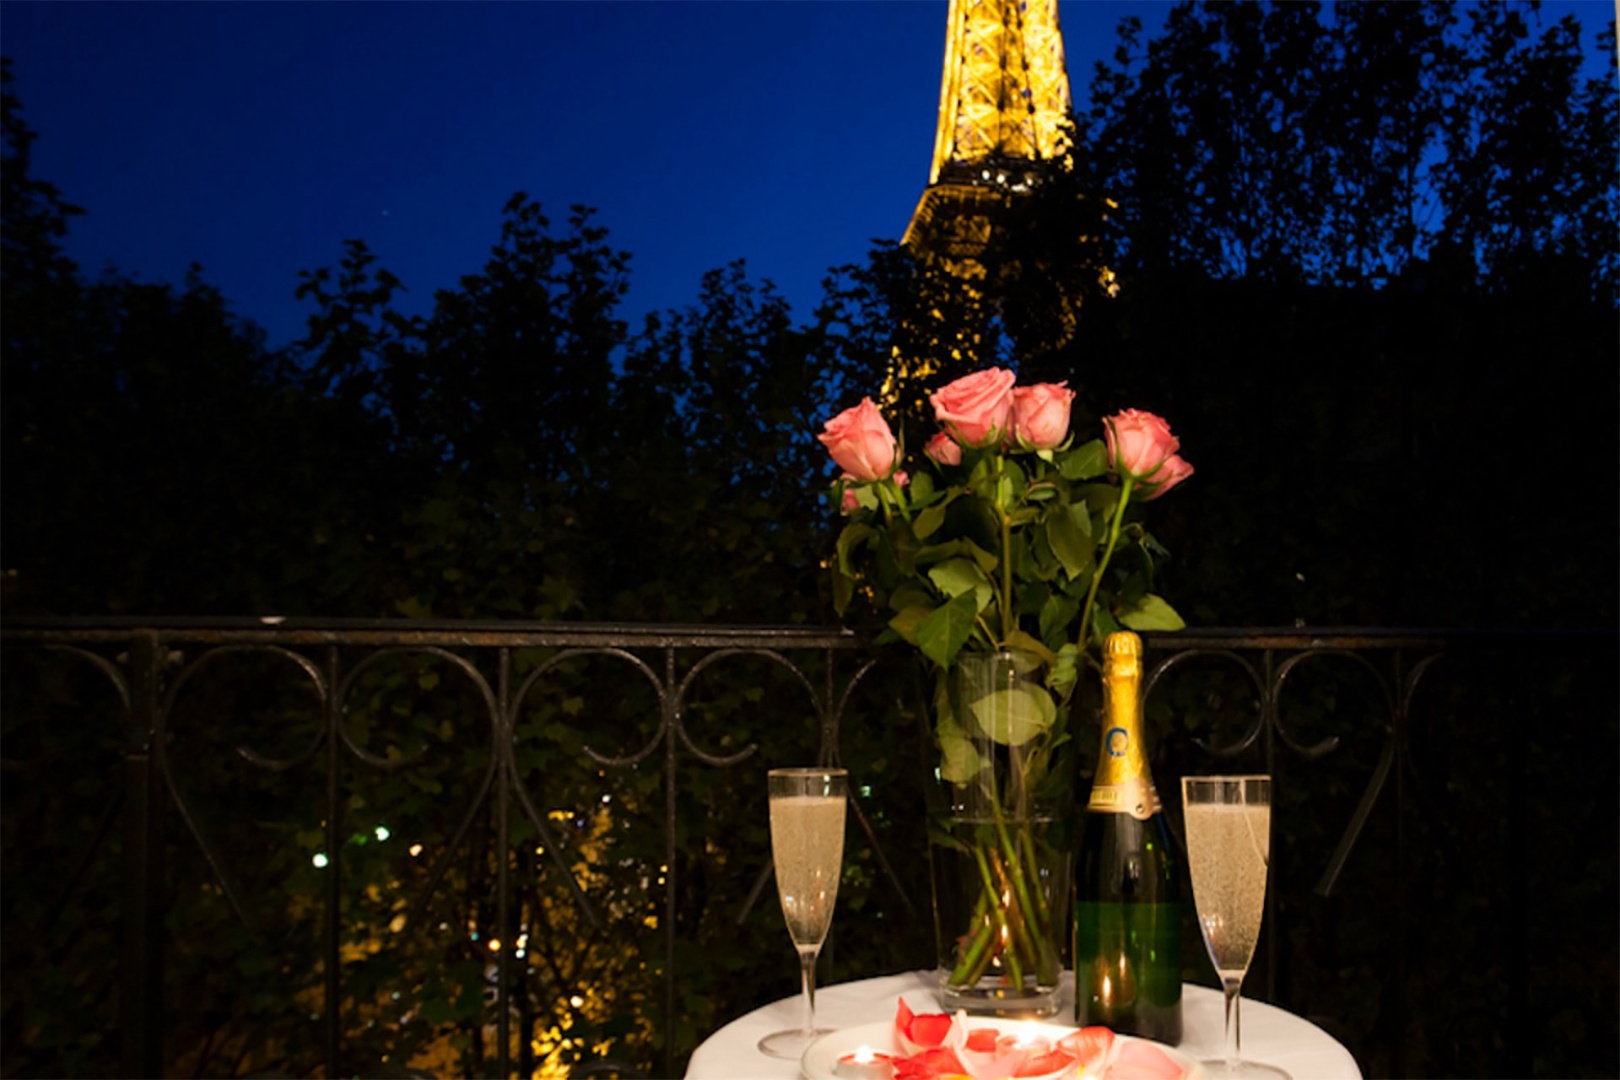 Enjoy cozy evenings on the balcony with fantastic Eiffel Tower views.